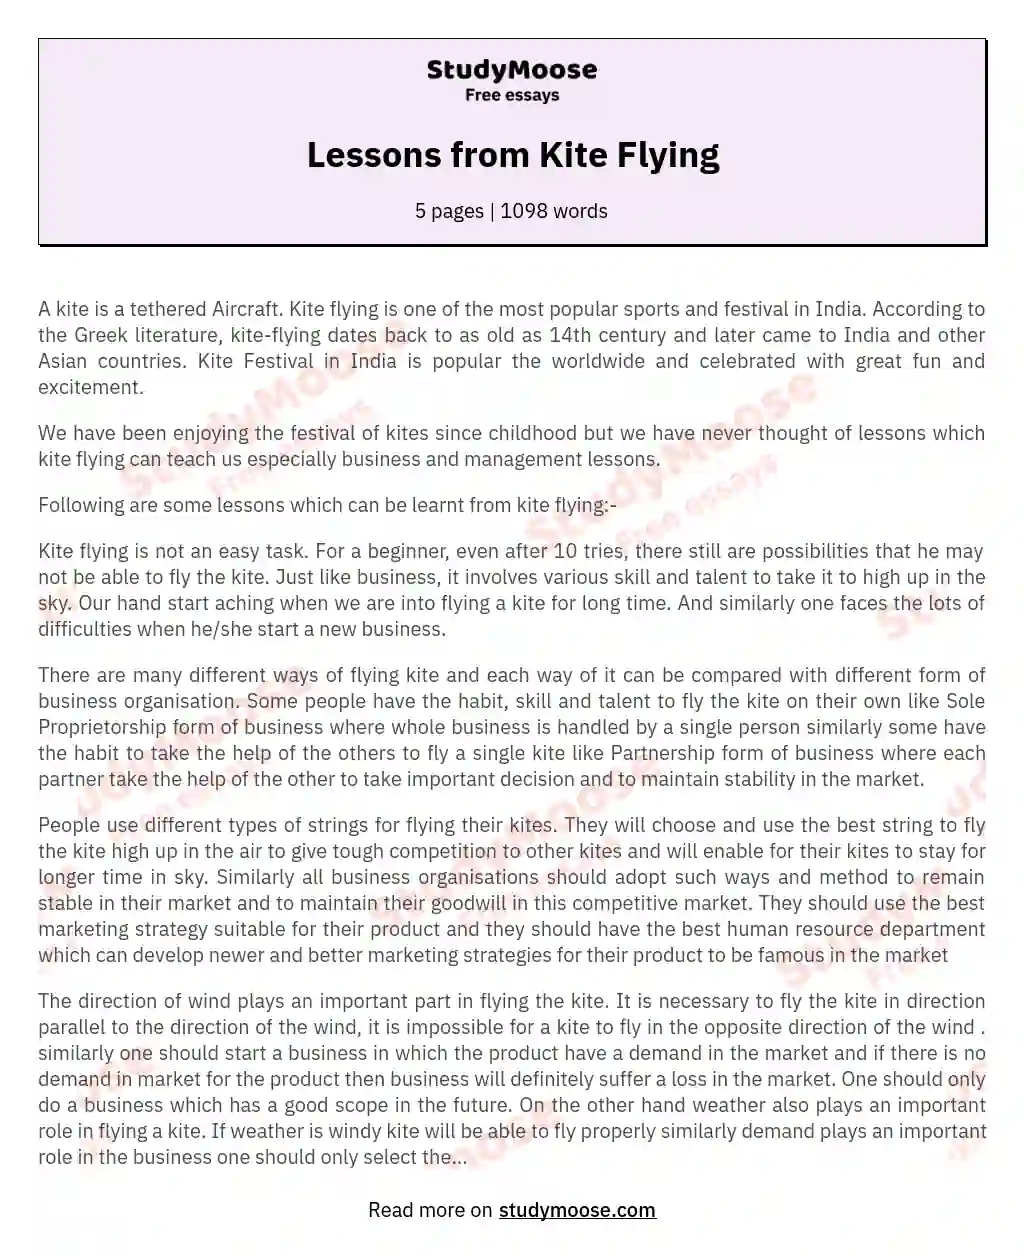 Lessons from Kite Flying essay